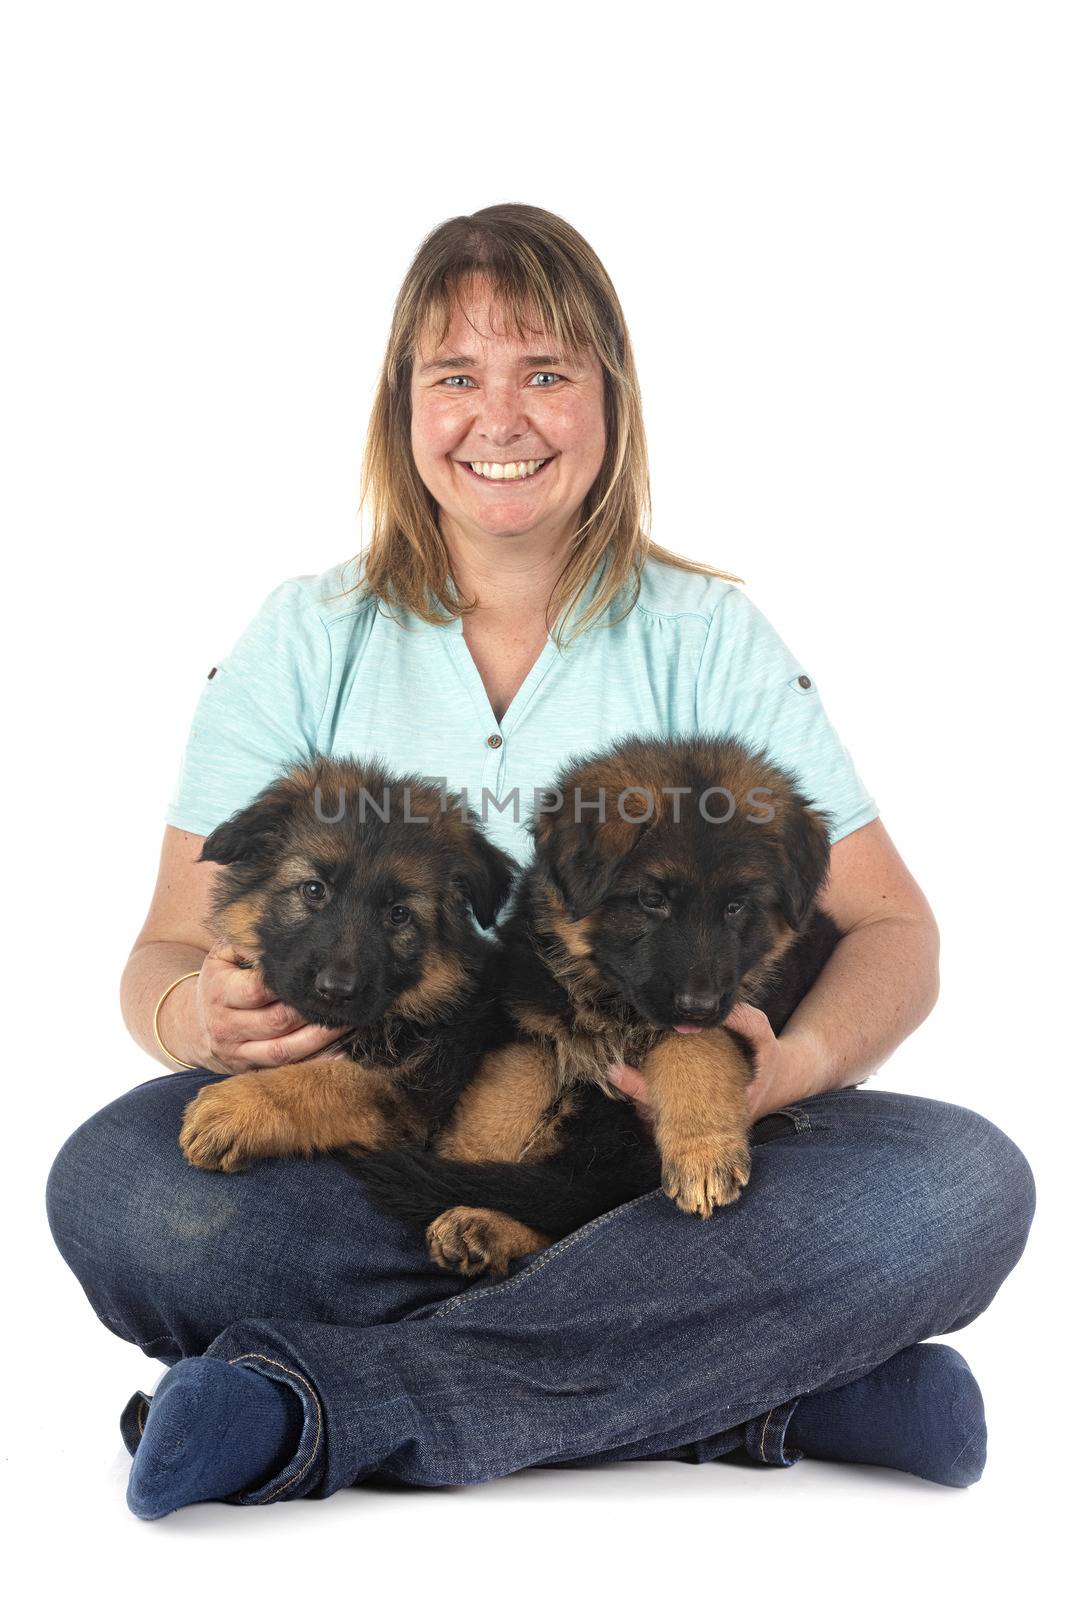 puppies german shepherd and woman in front of white background